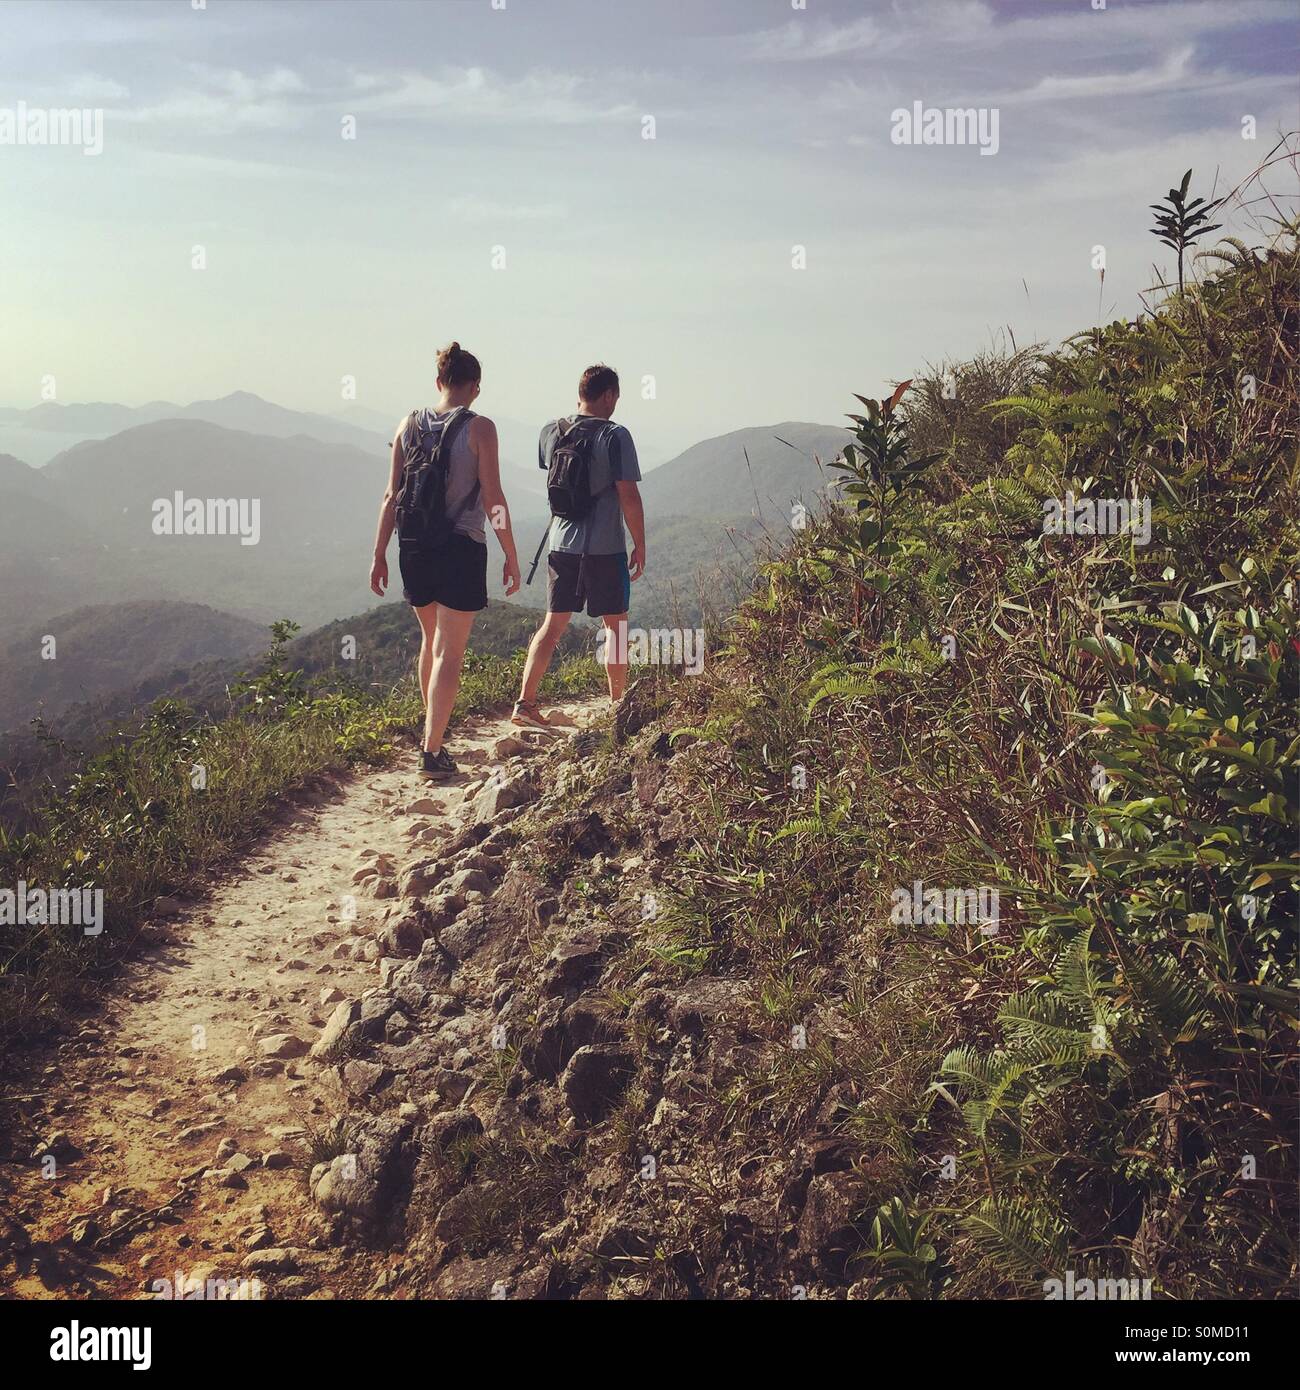 A man and a woman walking in the hills Stock Photo